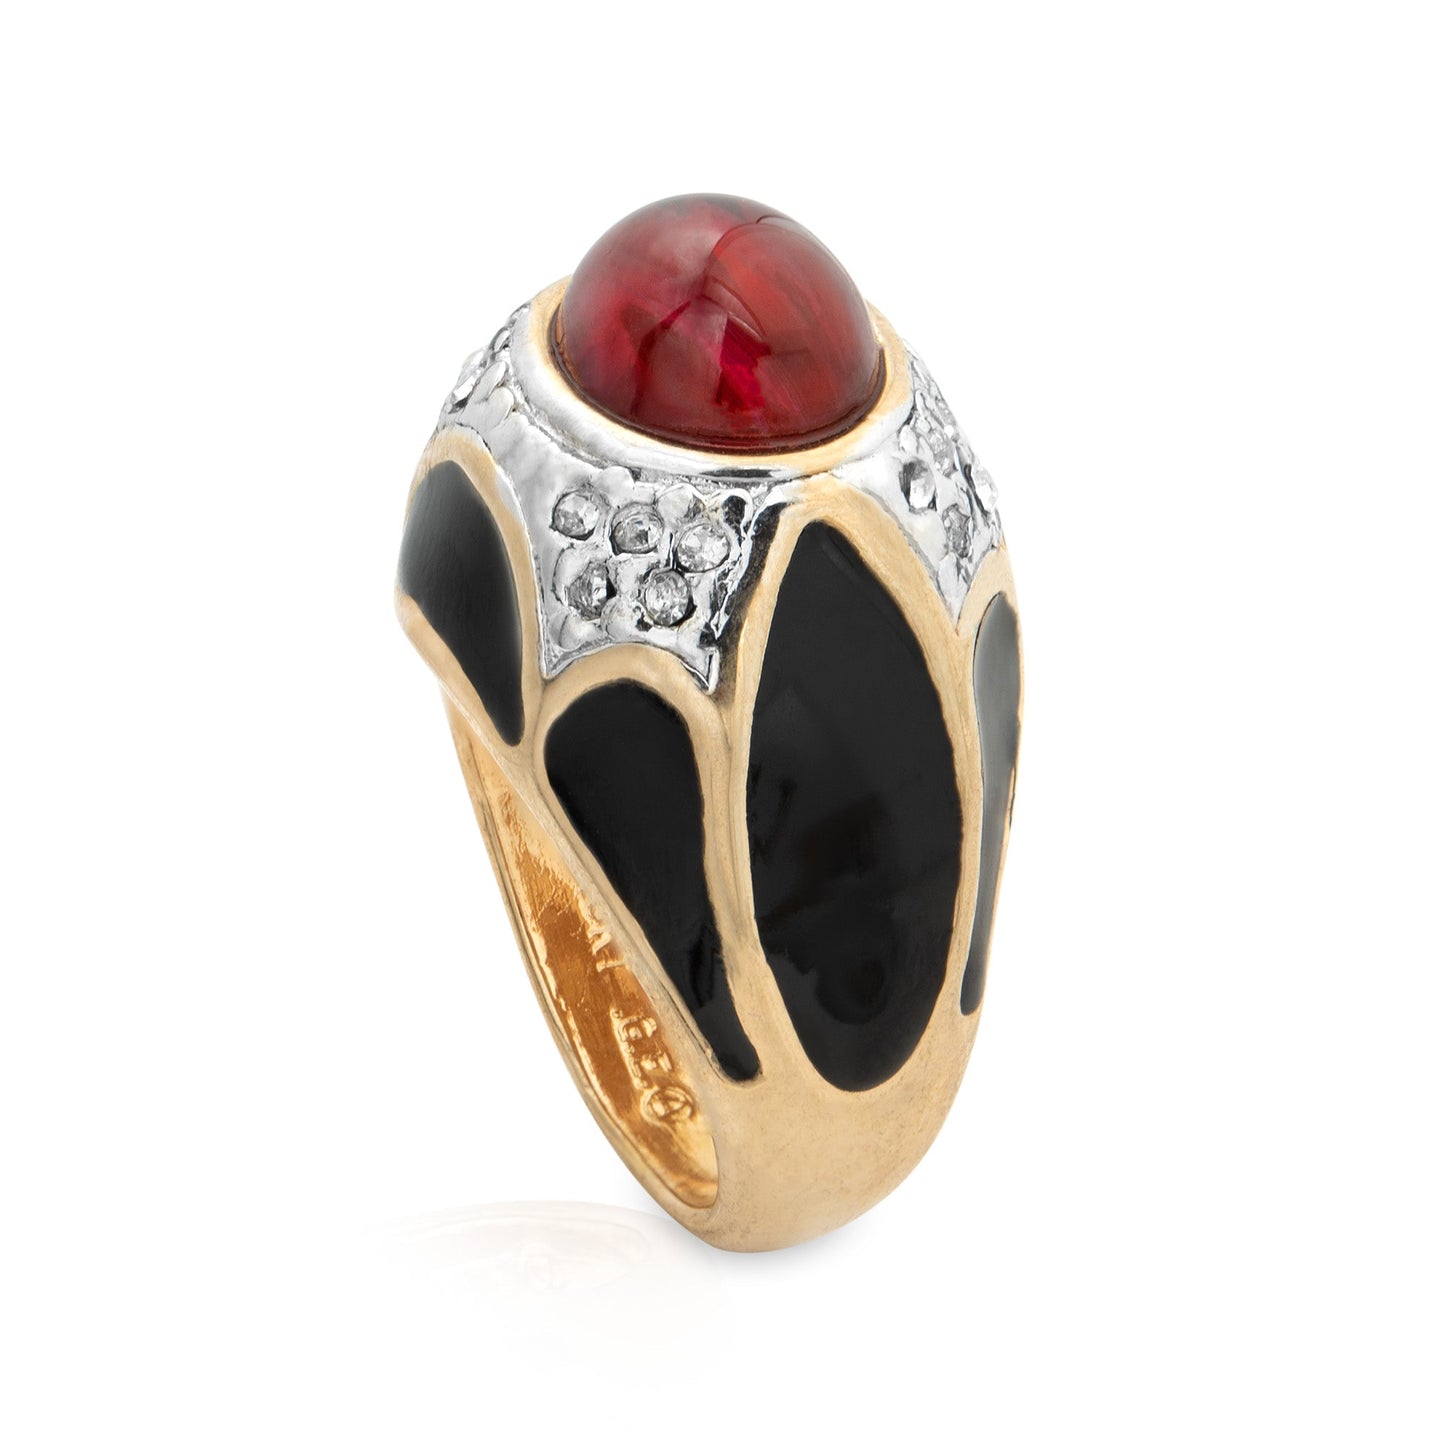 Vintage Ring 1980s Black Enamel Ring with Ruby Cabochon Stone Surrounded by Clear Crystals (6) by PVD Vintage Jewelry